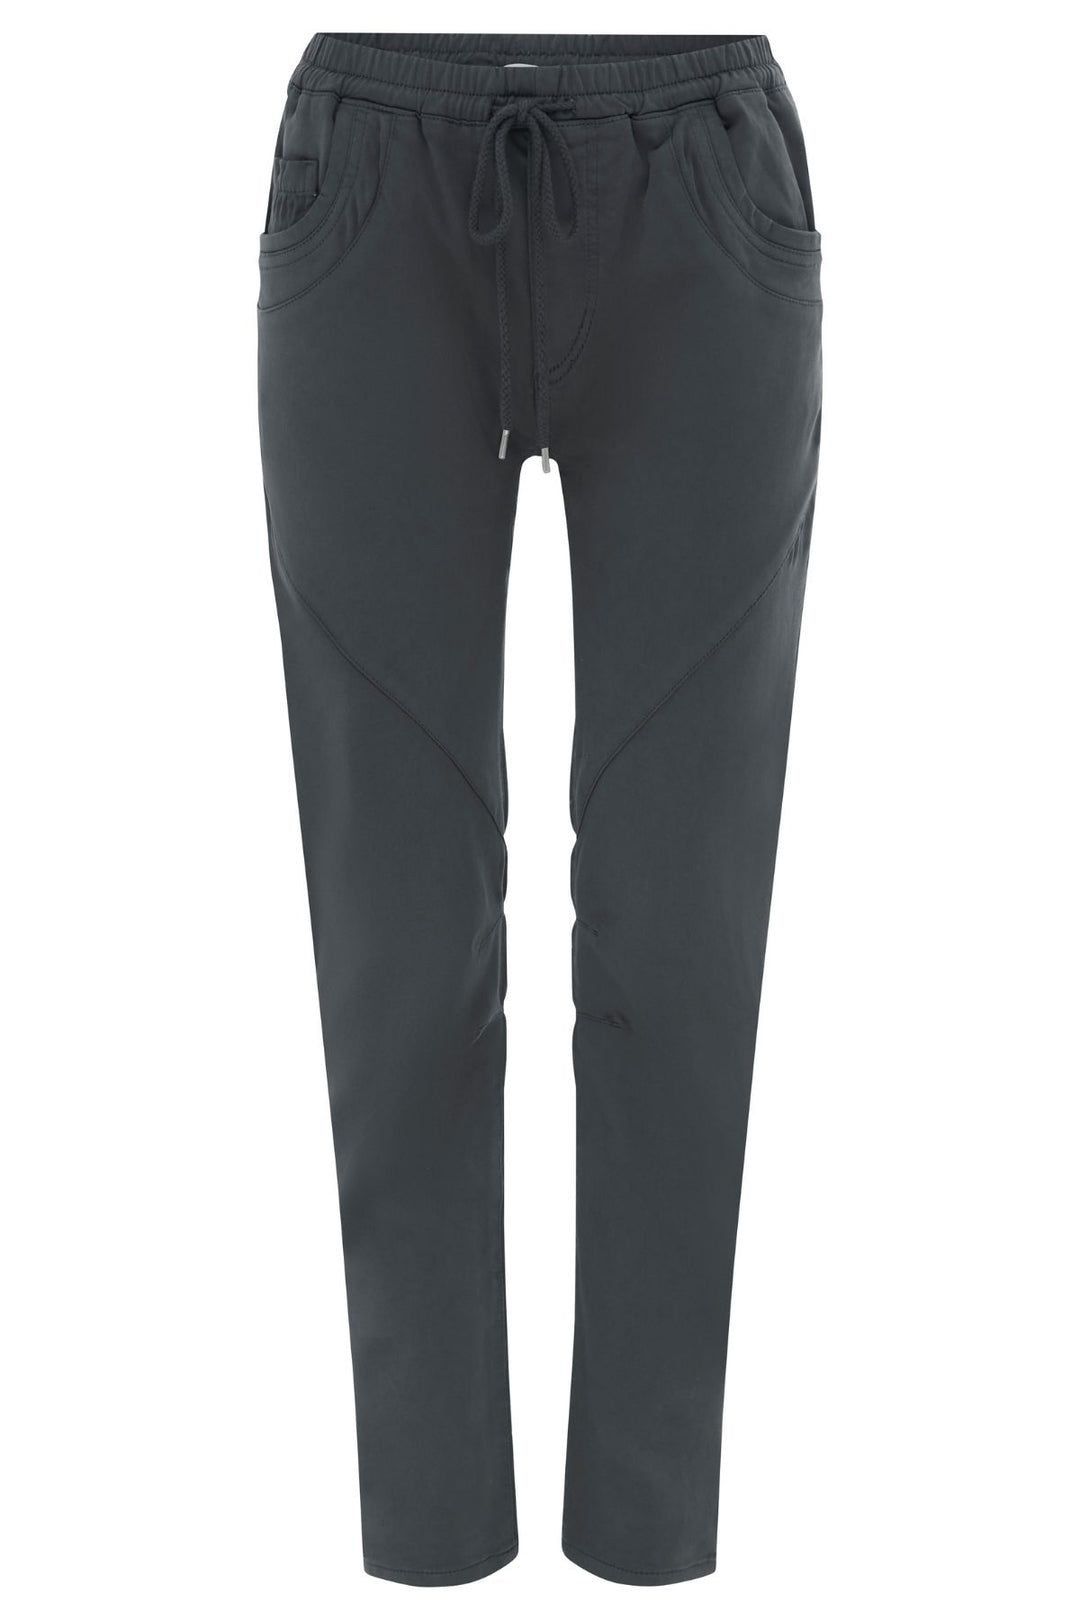 Look your best with these Margo Joggers by Milson. These pants are full length with a tie waist, and five convenient pockets, these jogger pants add style and practicality. The Cotton blend material ensures a comfortable fit and breathability, perfect for everyday use.  Brand : Milson Style Code : ML6152 Colour : Black Sand Fabric : 98% Cotton 2% Spandex Wash separately, cold hand wash only 